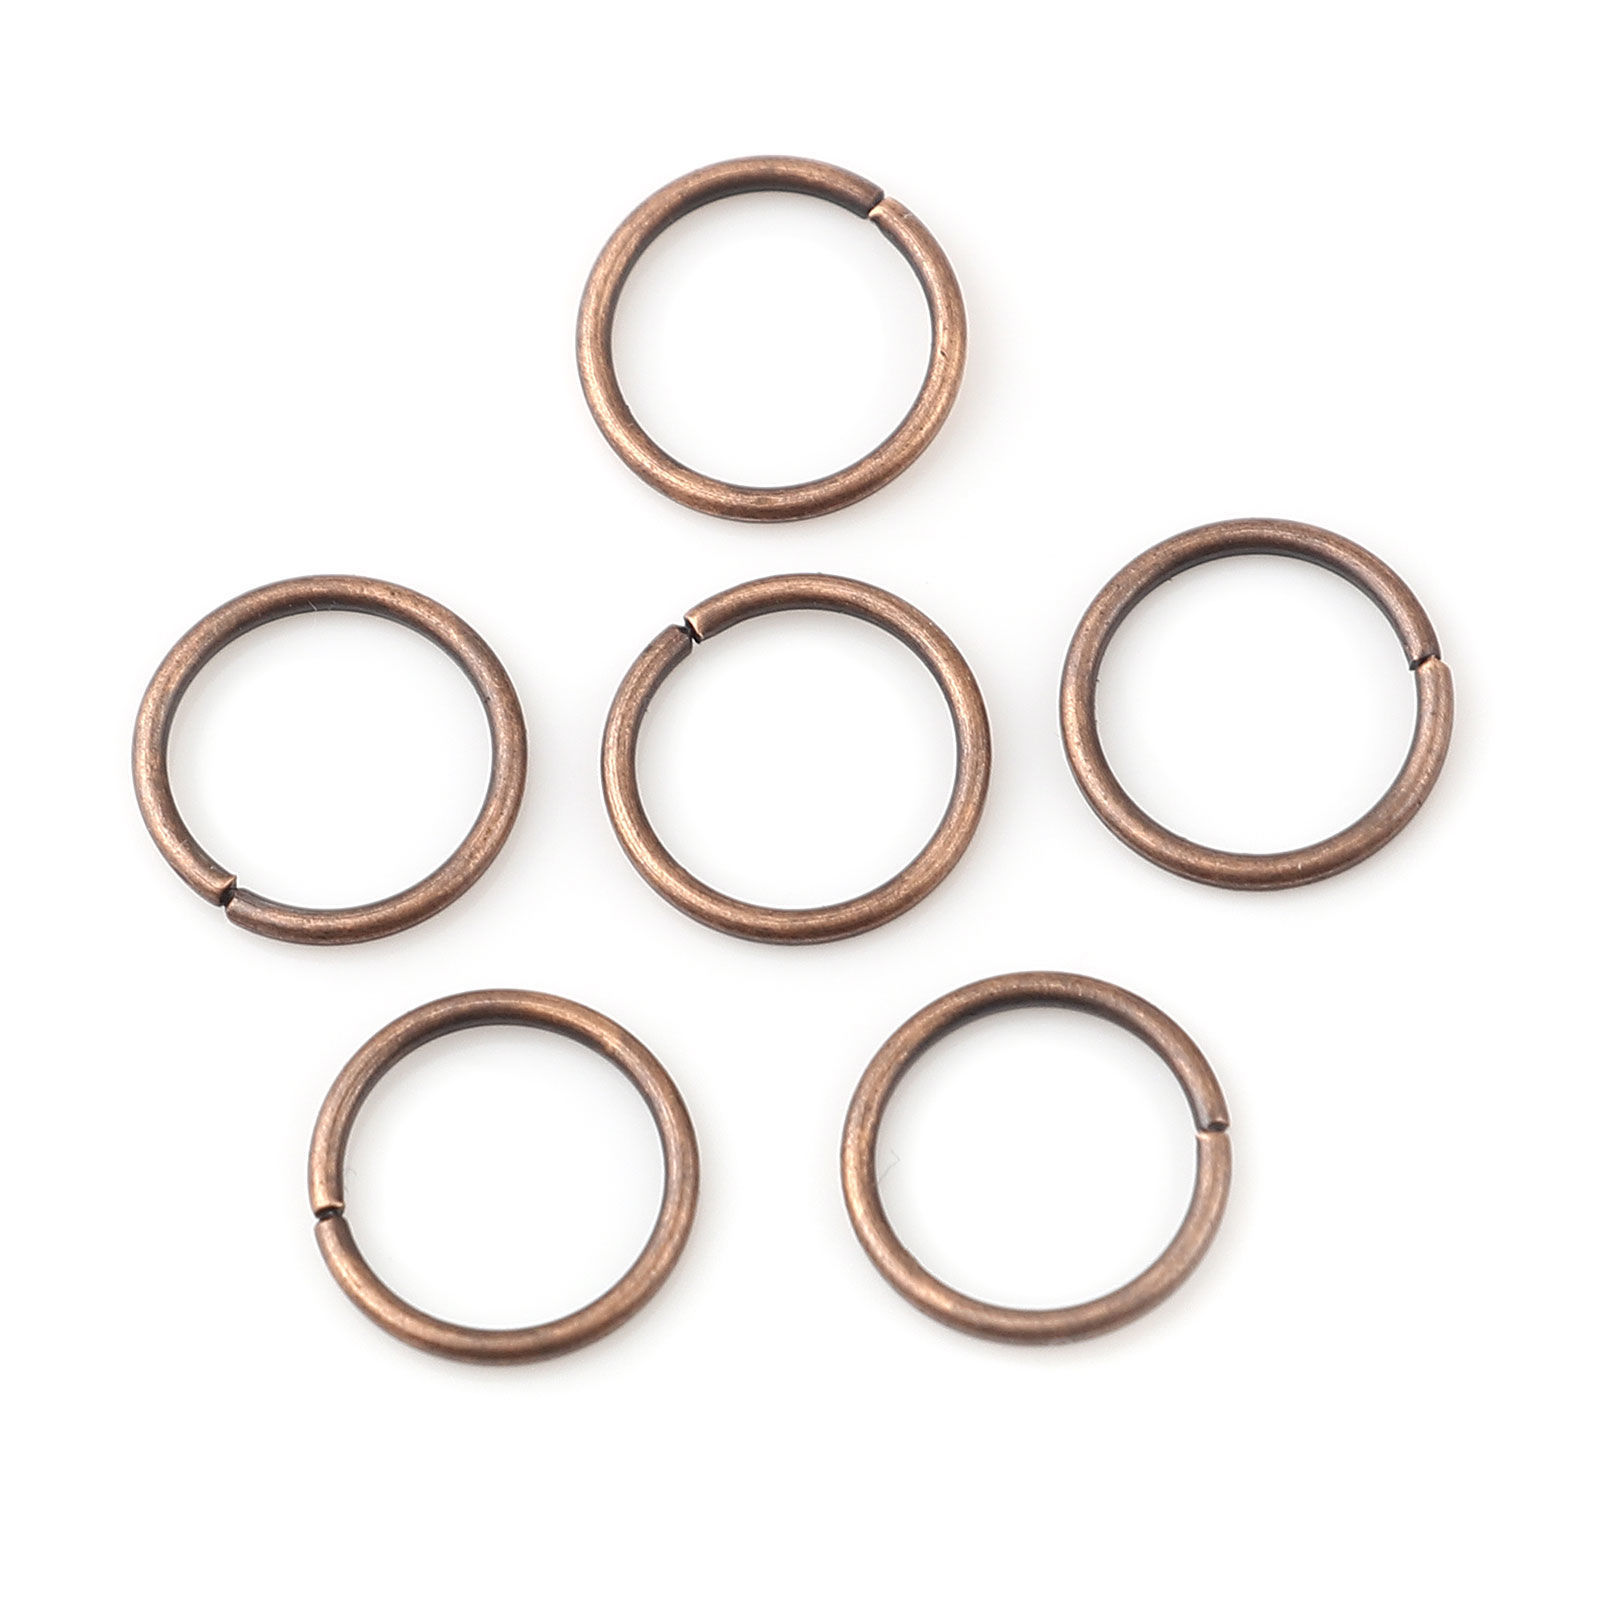 Picture of 0.5mm Iron Based Alloy Open Jump Rings Findings Circle Ring Antique Copper 3mm Dia, 200 PCs